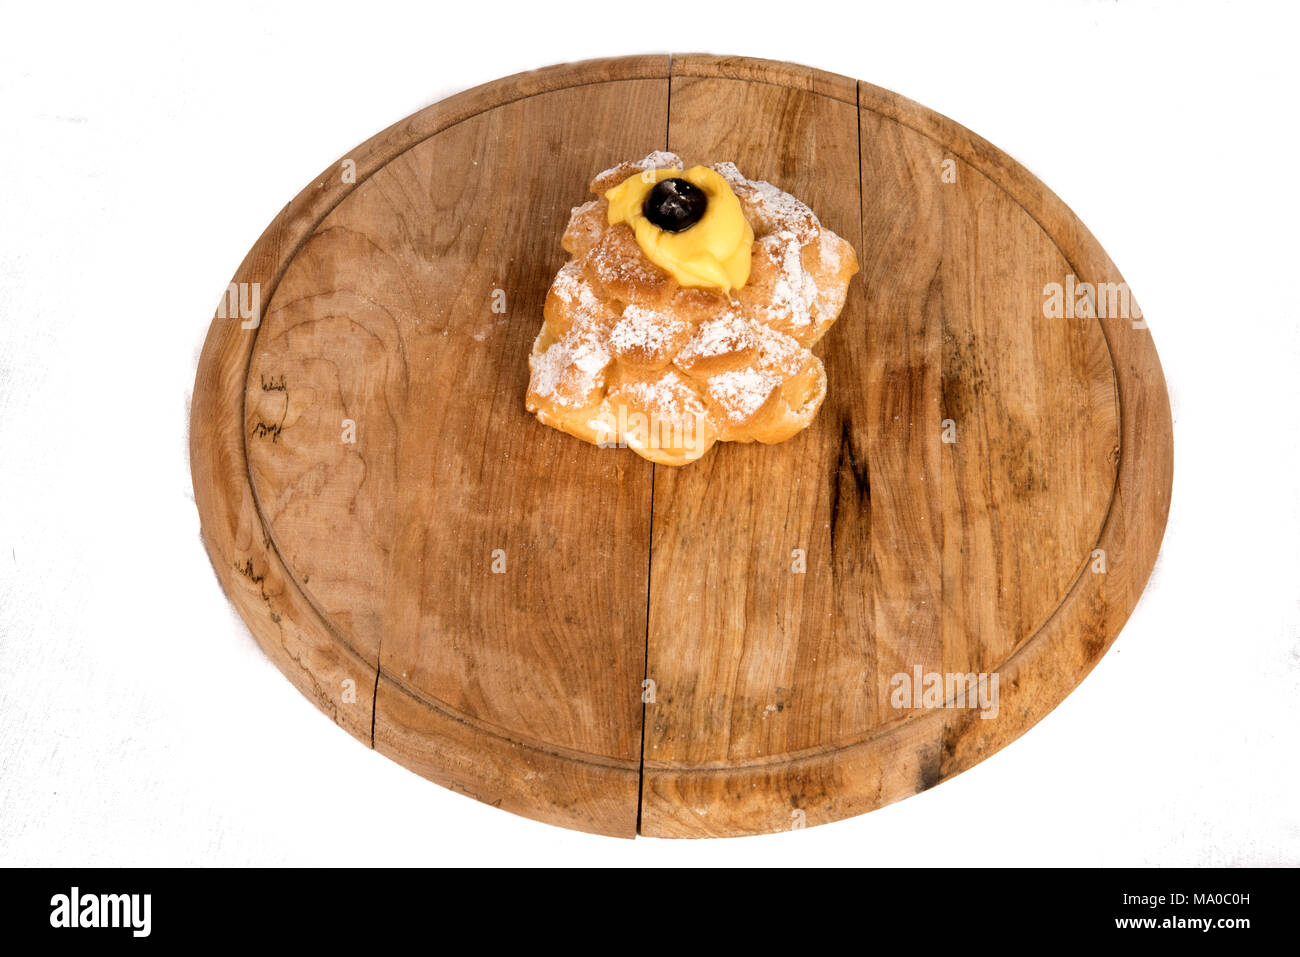 Saint Joseph's Zeppole composition in display on a wooden plate Stock Photo